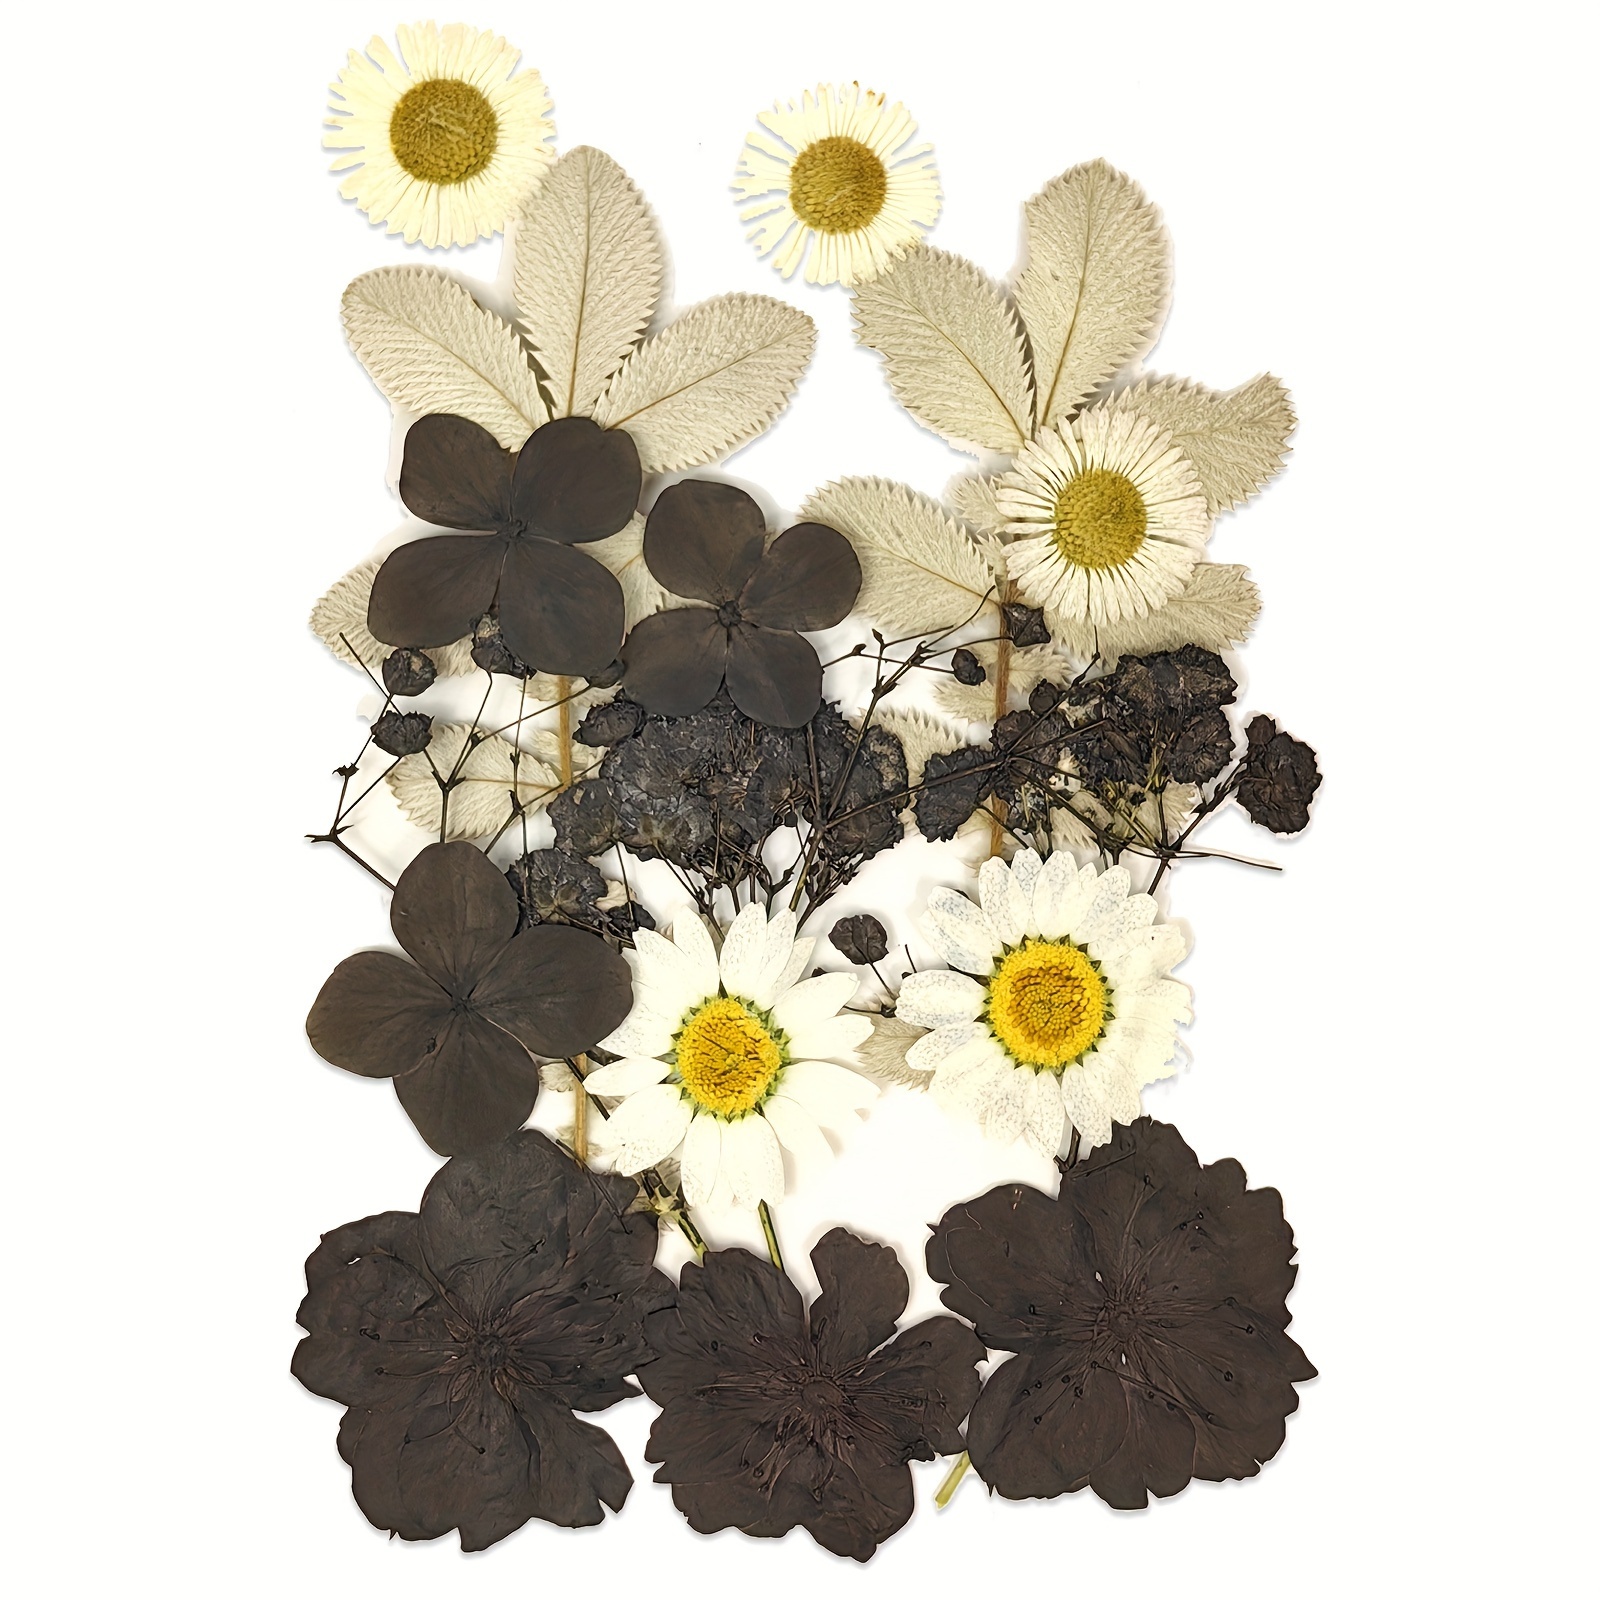  Natural Dried Flowers, Dried Flower Real Dried Pressed